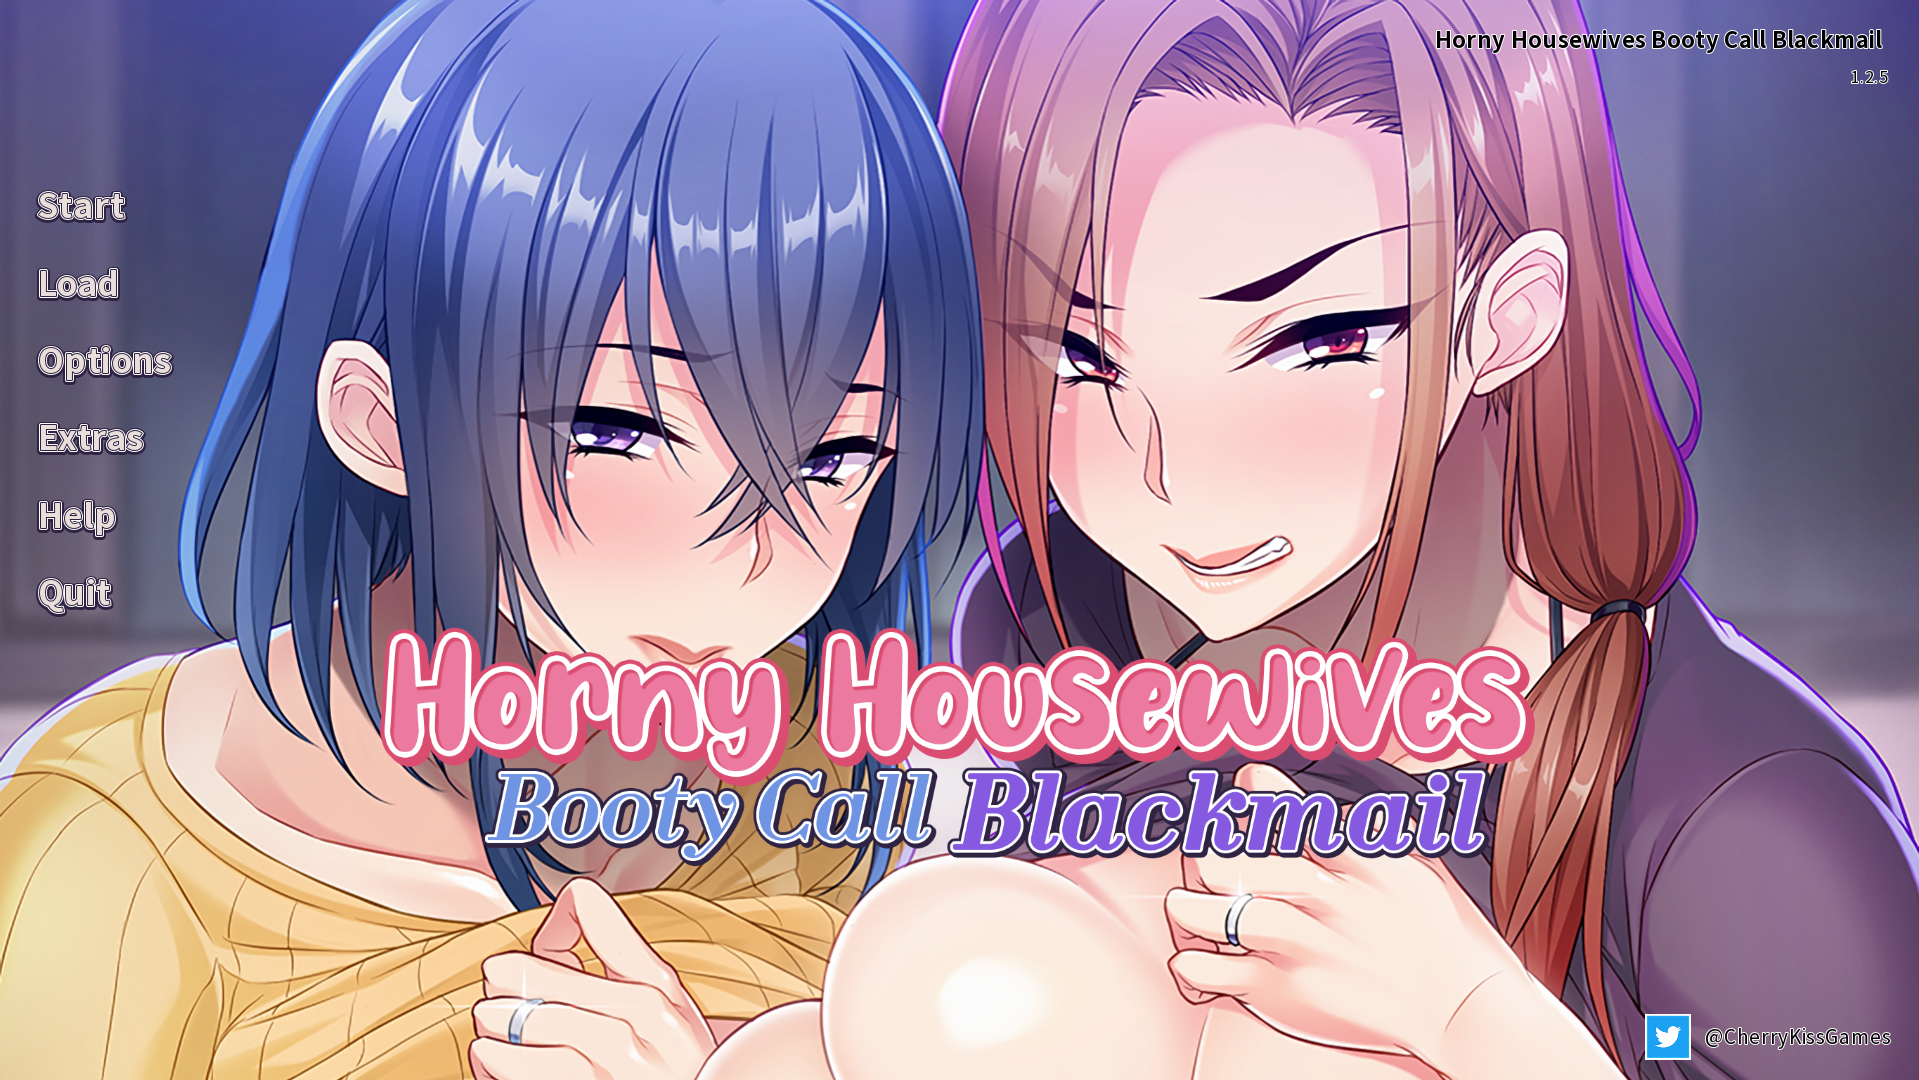 Horny Housewives Booty Call Blackmail COMPLETED - free game download, reviews, mega